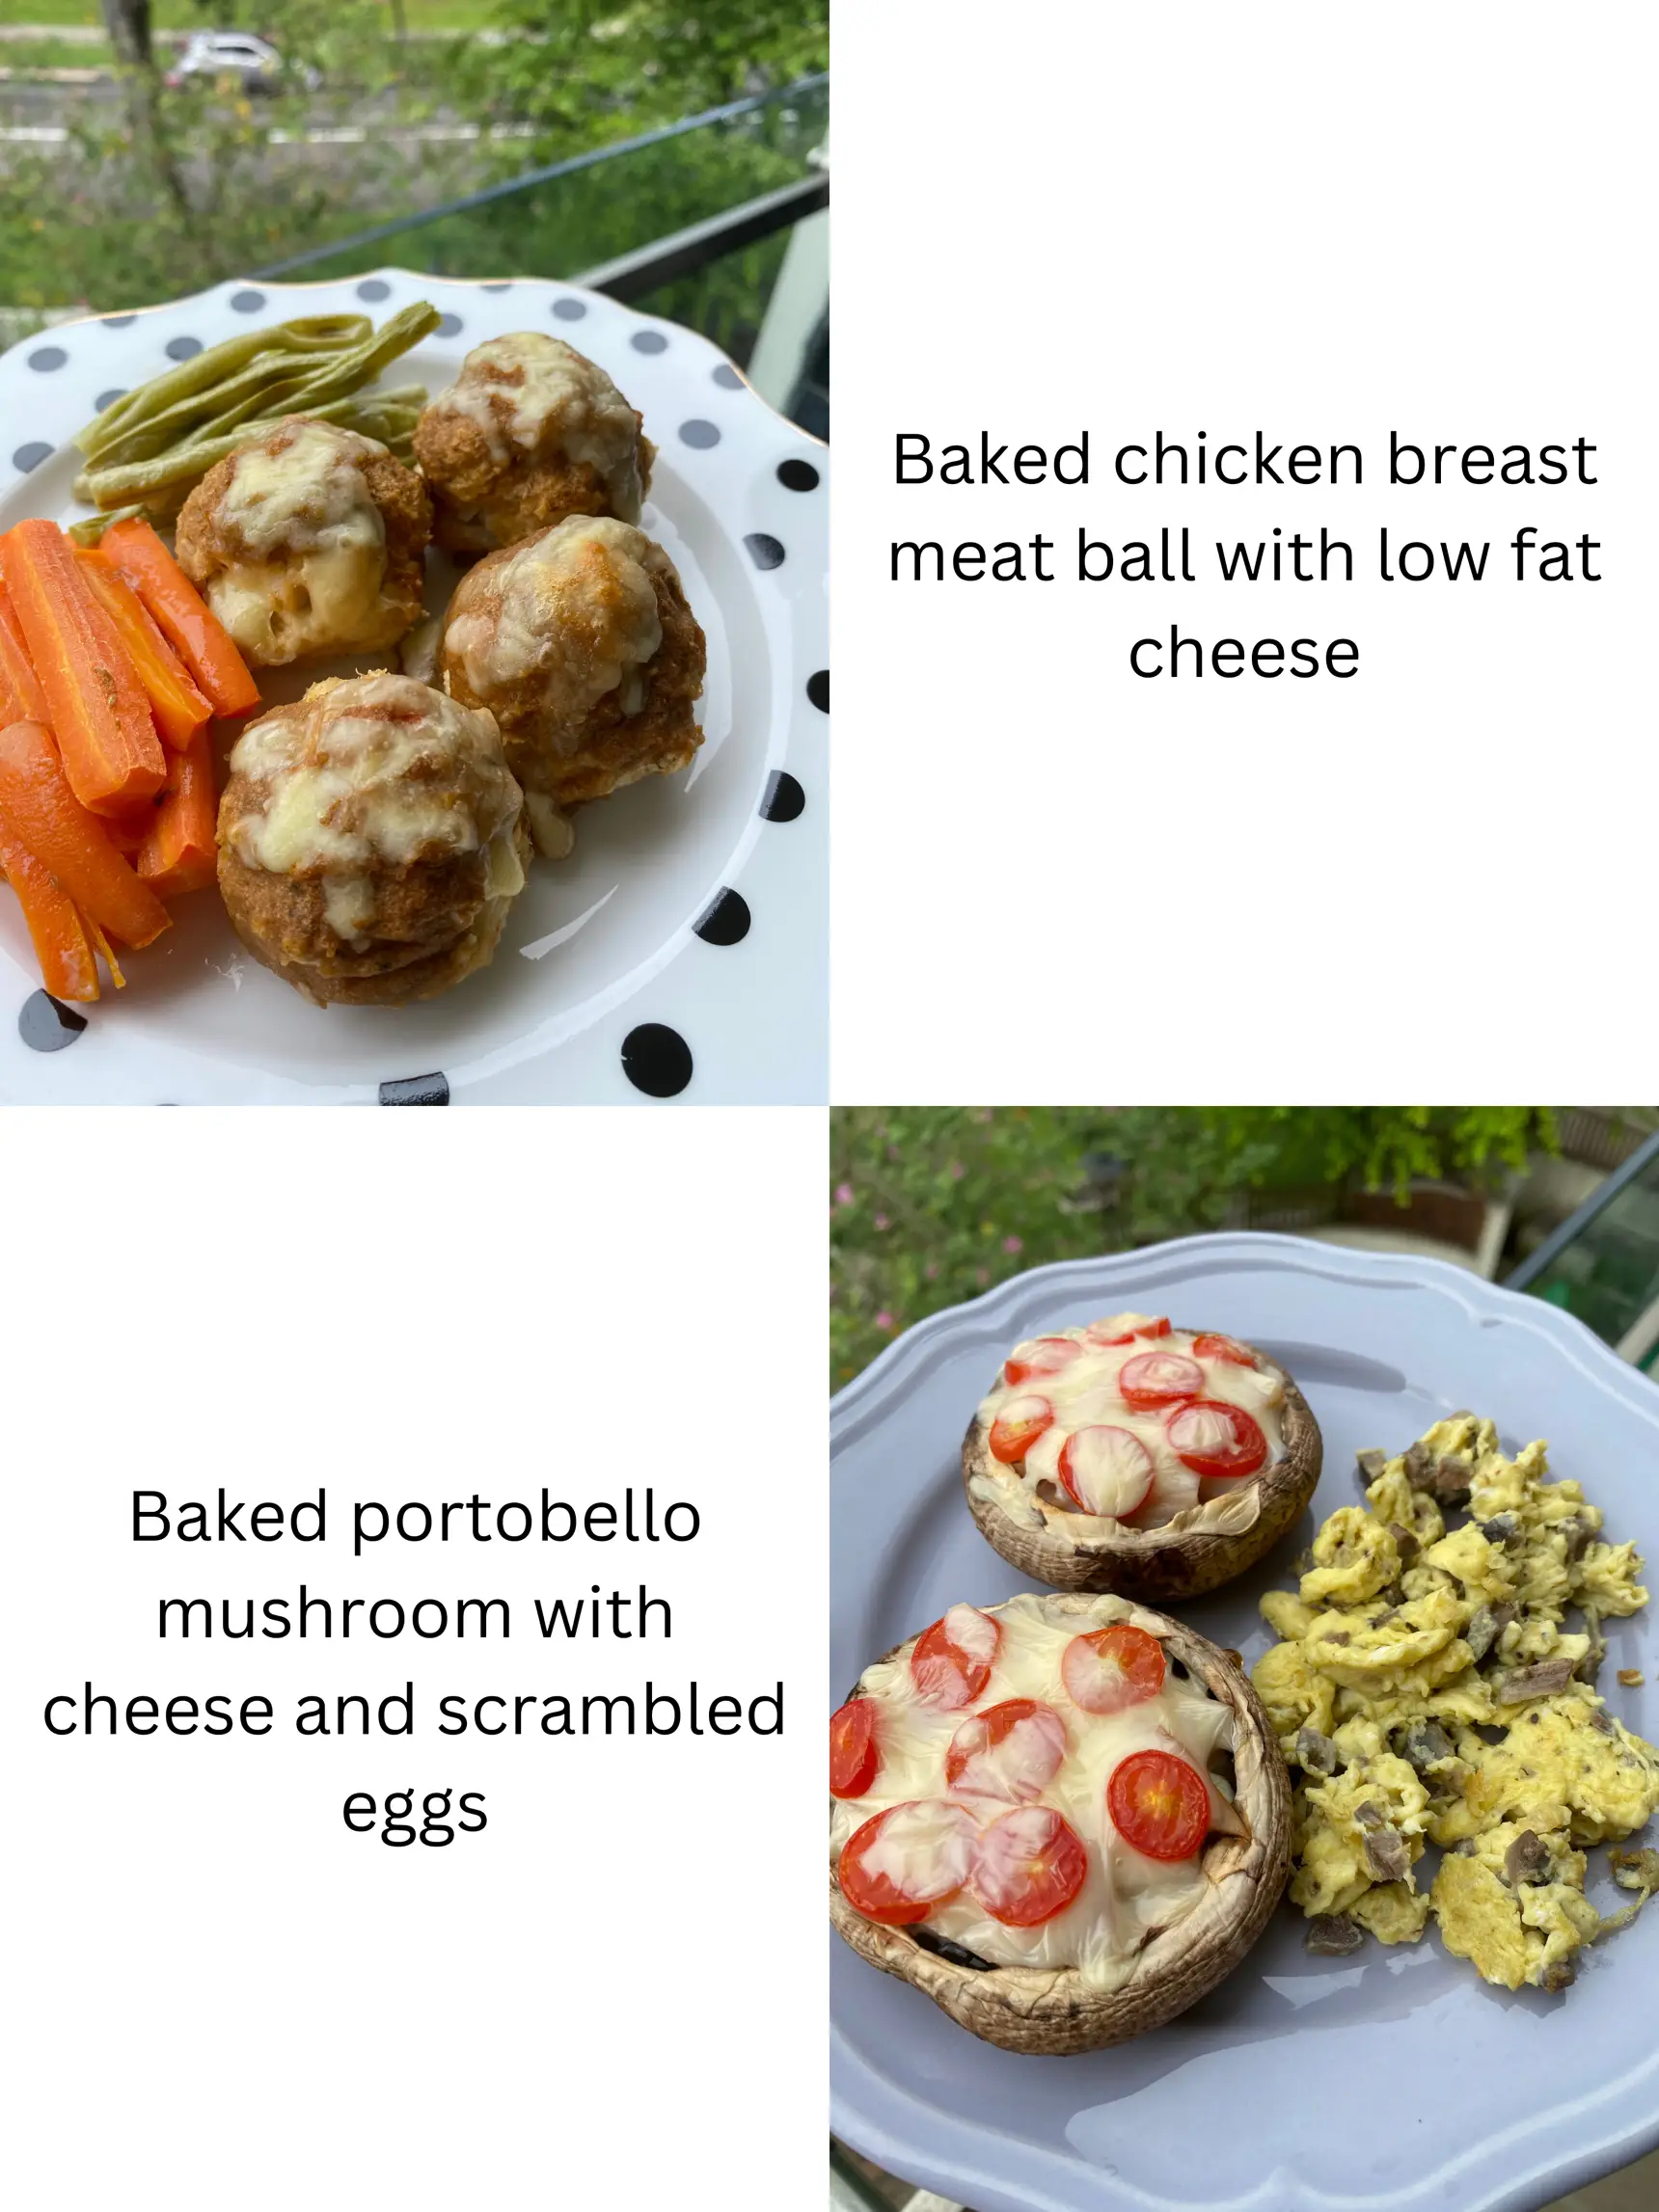 Easy lunch recipes that helped me lose 8kg 💪🏻's images(4)